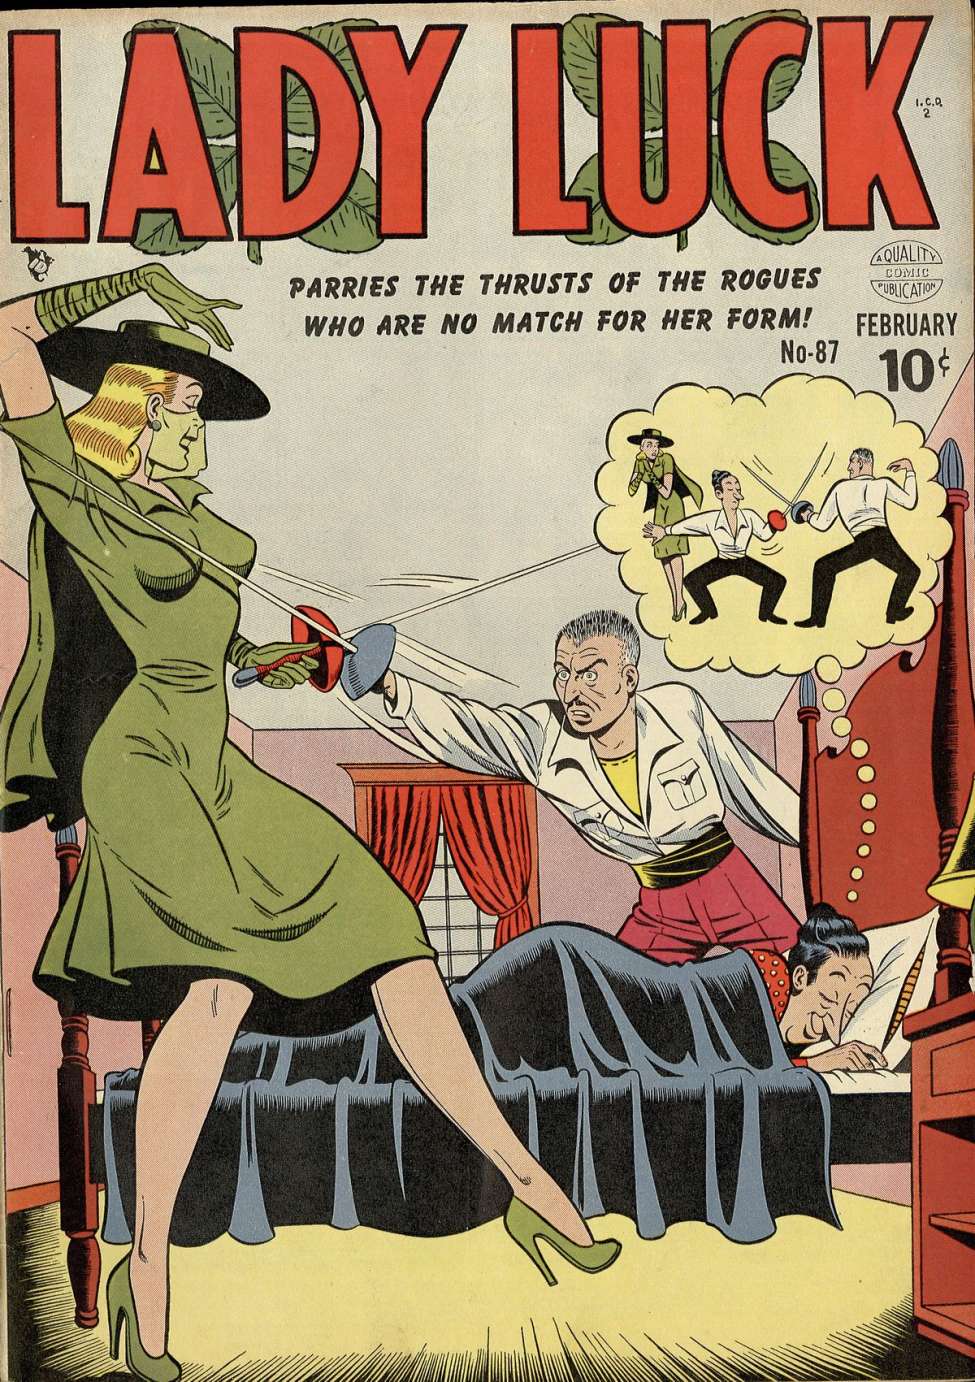 Book Cover For Lady Luck 87 - Version 1